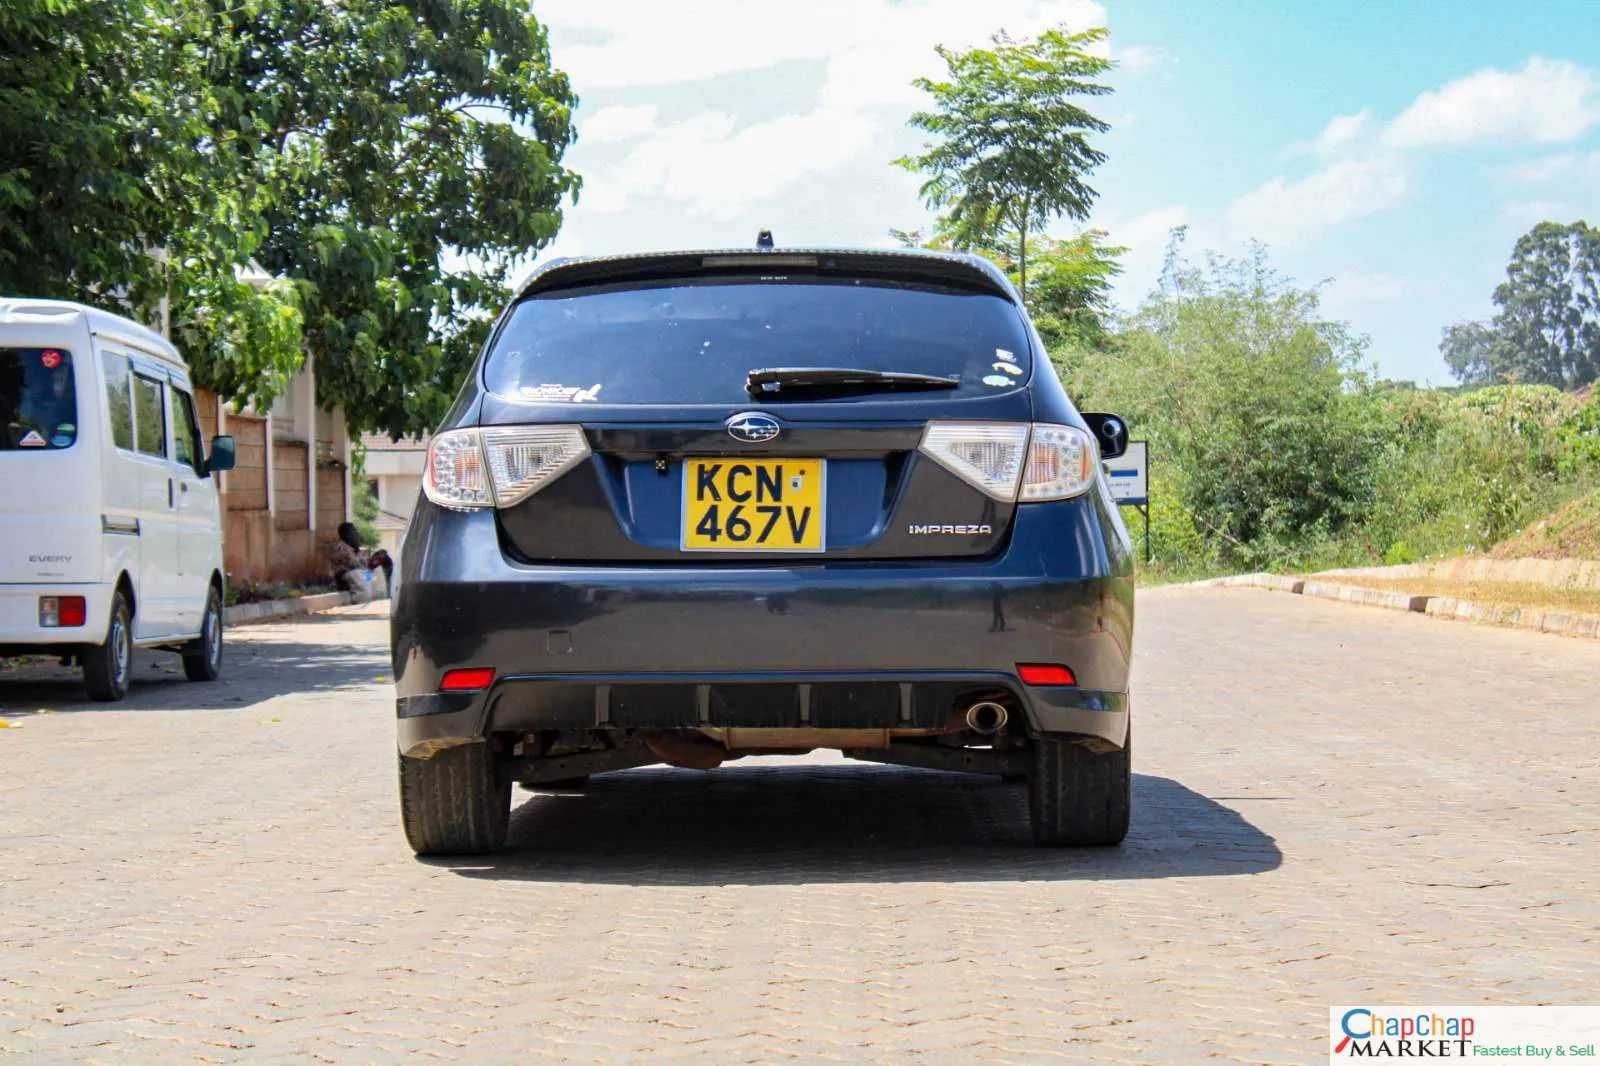 Subaru Impreza for sale in kenya 🔥 QUICK SALE You Pay 20% deposit Trade in Ok hire purchase installments 🔥